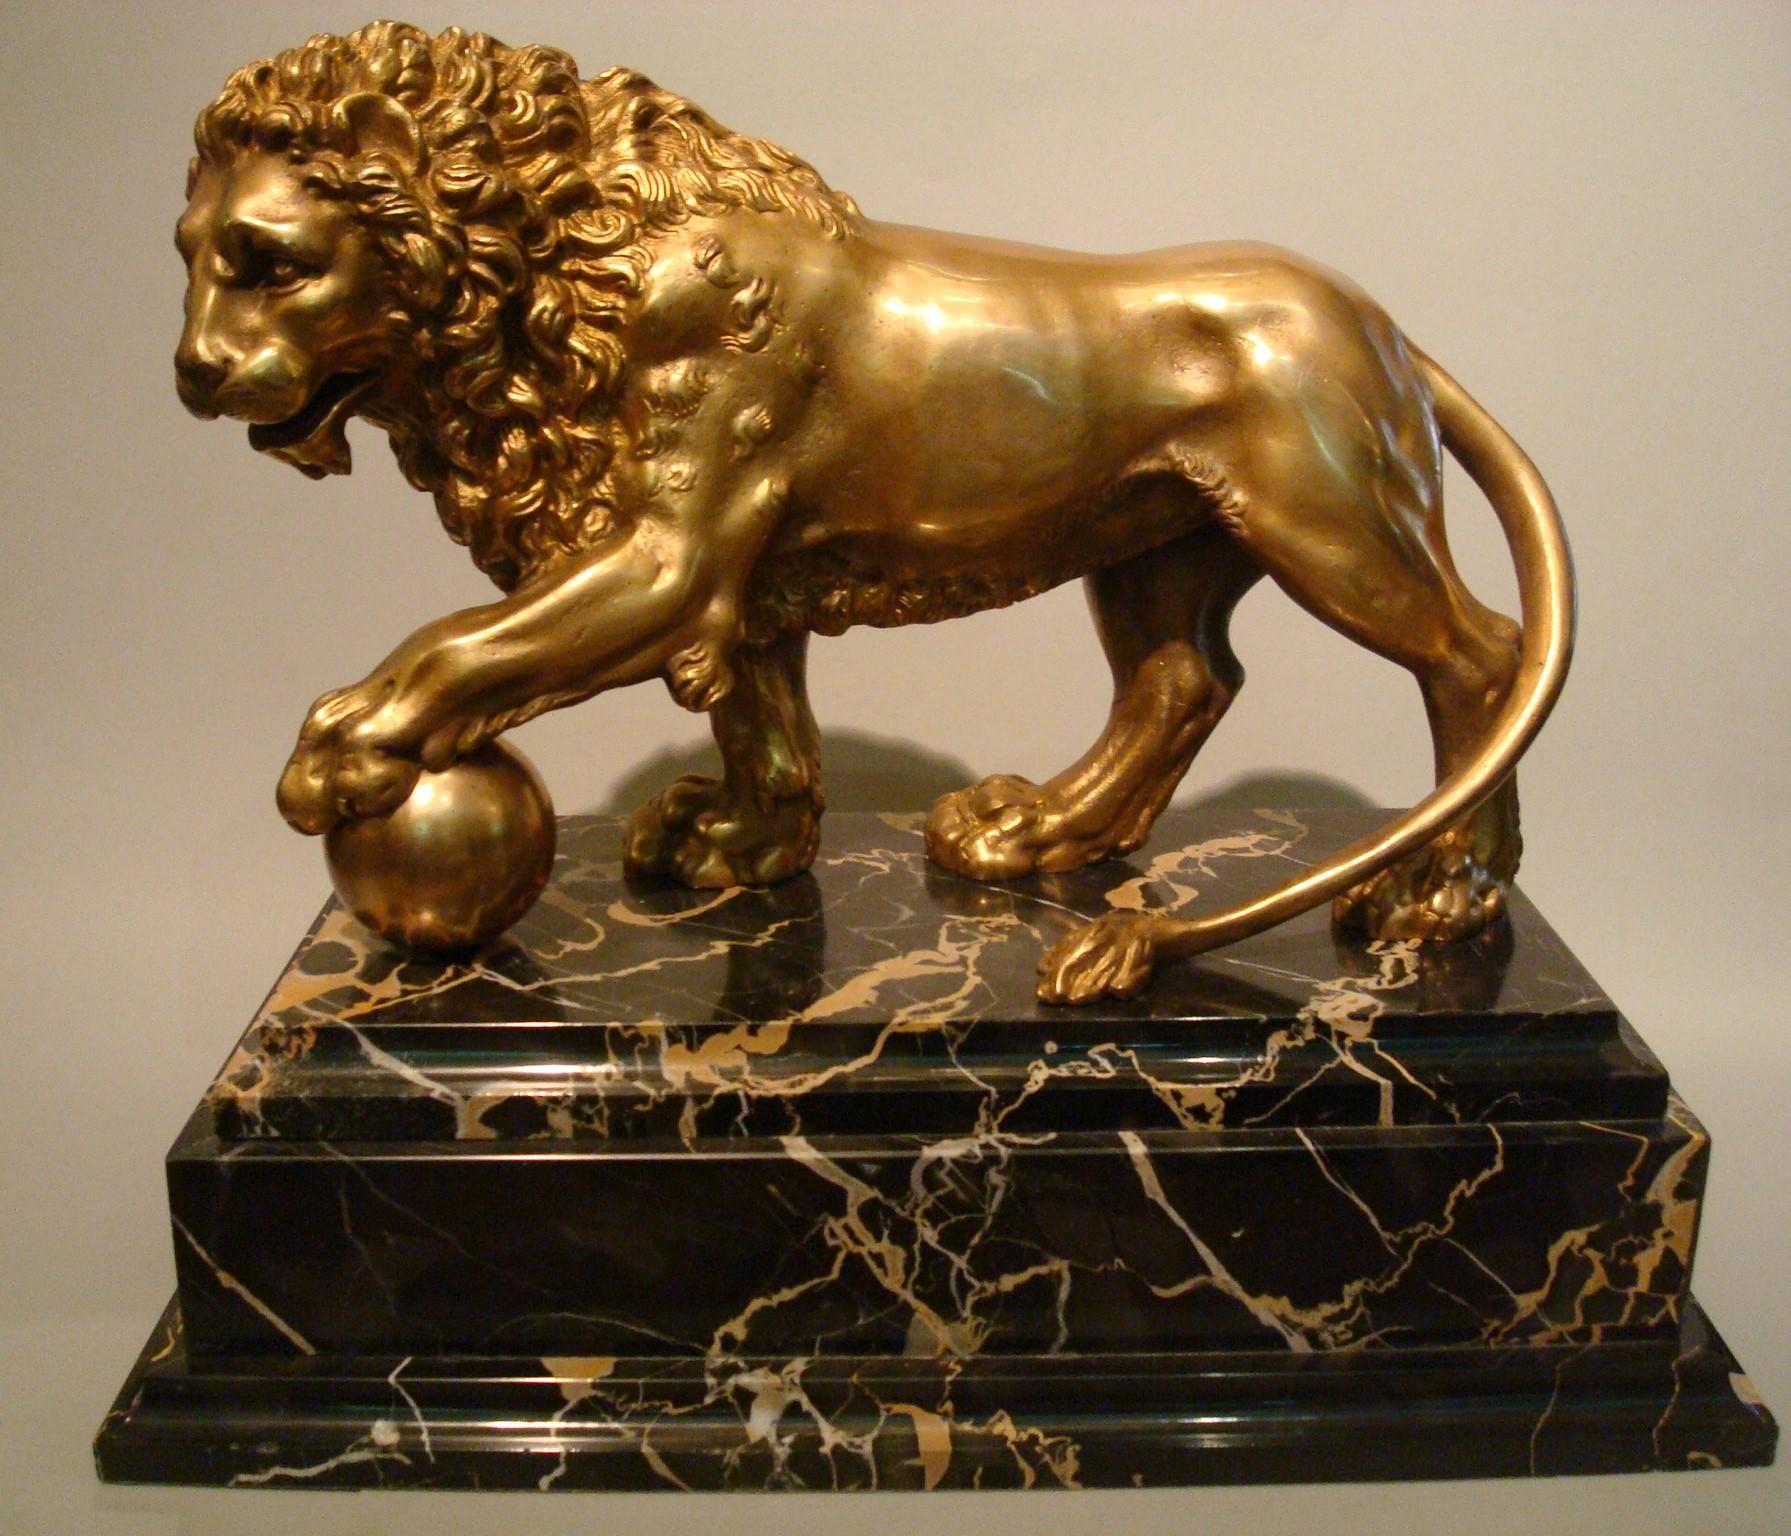 An early 19th century Italian bronze lion, after the marble version carved circa 1594 by Flaminio Vacca for the Medici Villa in Rome, itself a companion to the Ancient Roman version in the Medici collection from the 1st or 2nd century AD. This